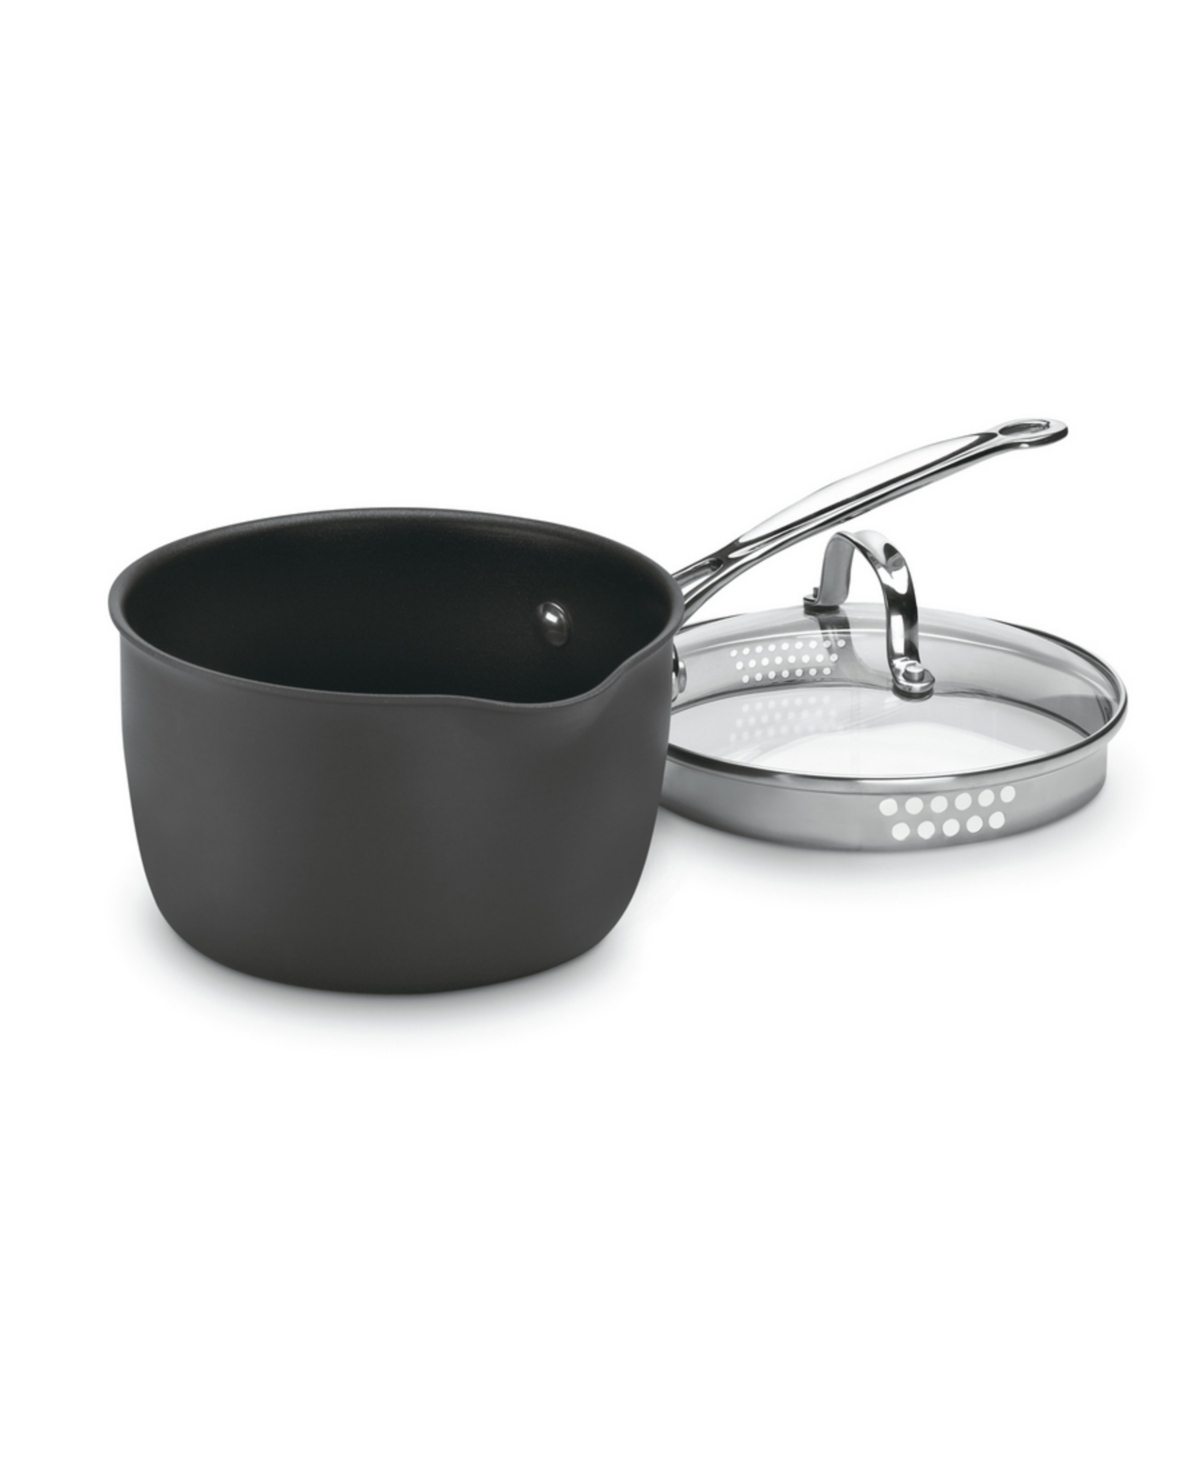 Cuisinart Chefs Classic Hard Anodized 3-qt. Cook And Pour Saucepan W/ Cover In Nonstick Hard Anodized